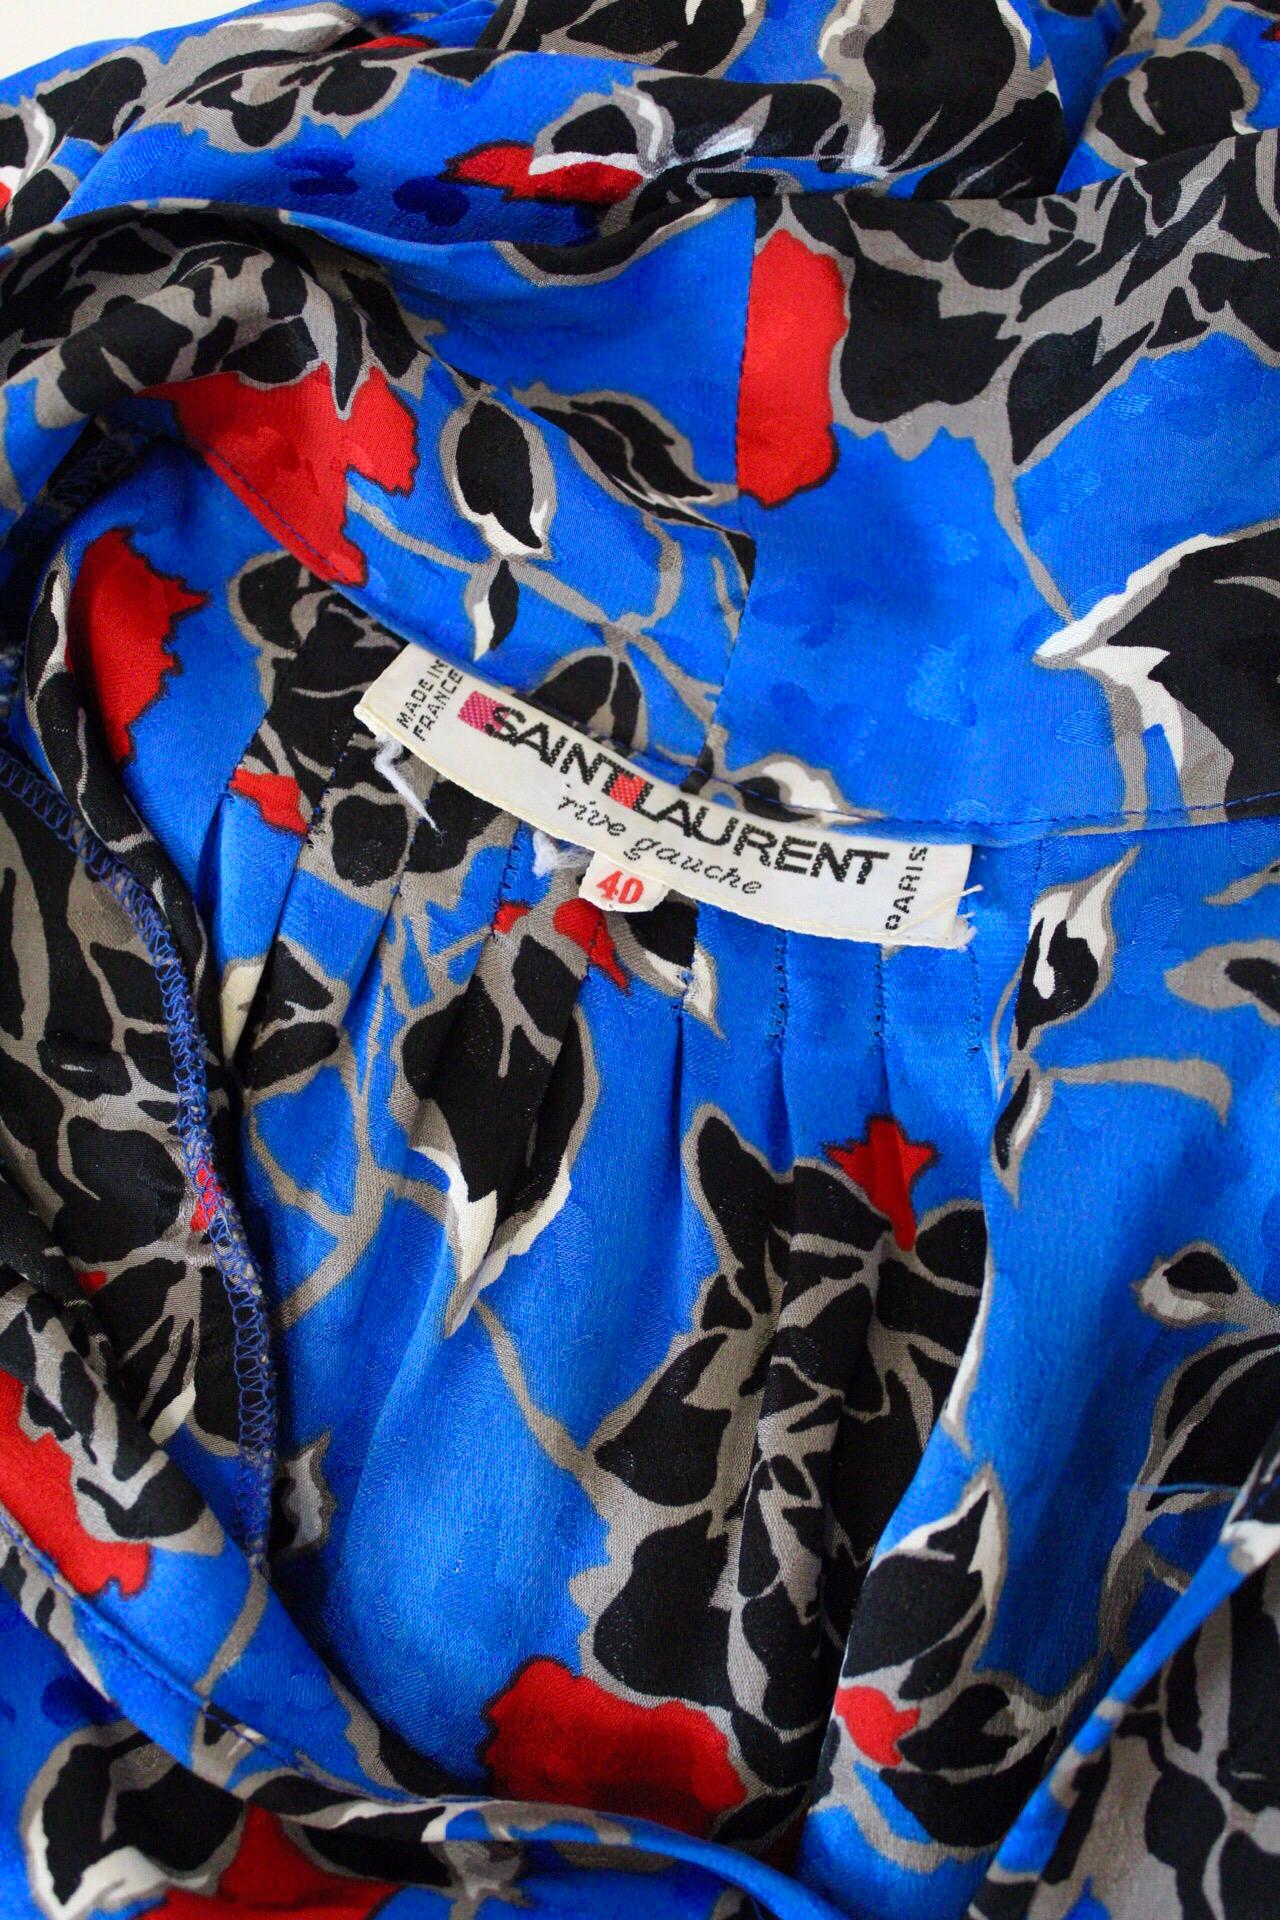 Yves Saint Laurent 1980s Silk Floral Print Dress In Good Condition For Sale In Scottsdale, AZ